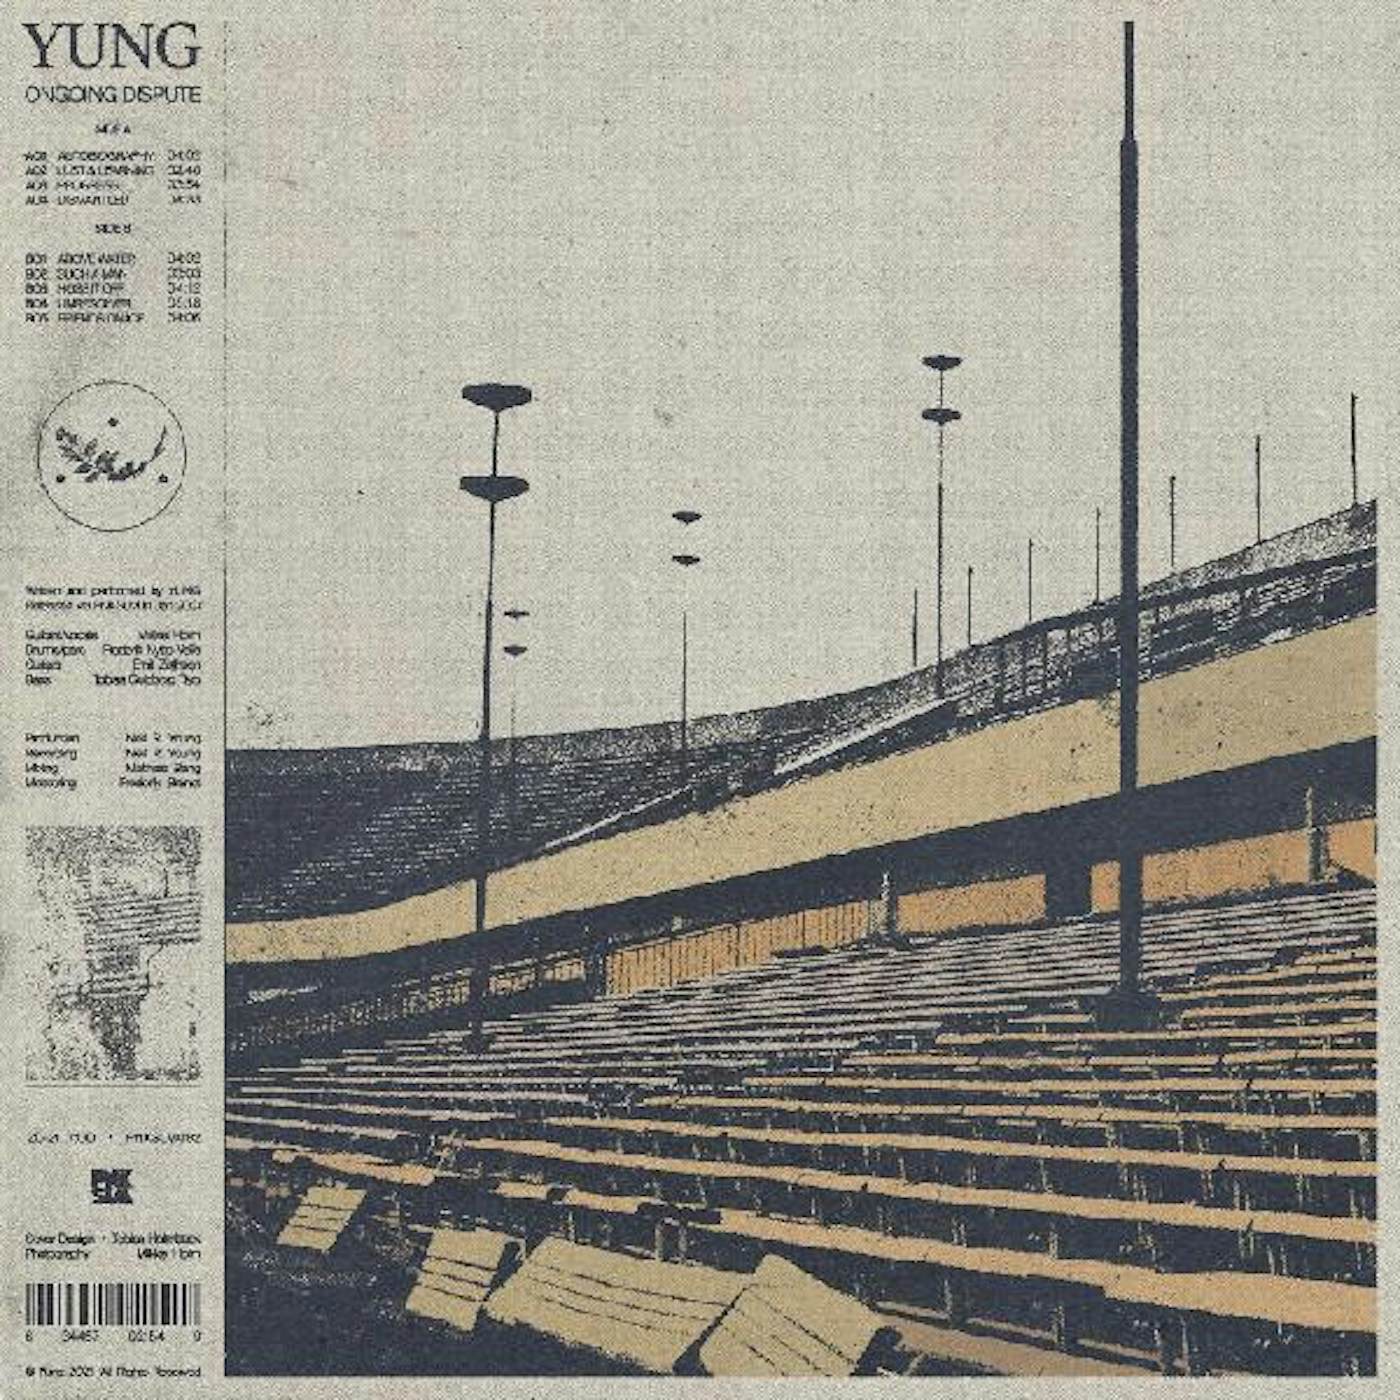 Yung Ongoing Dispute Vinyl Record